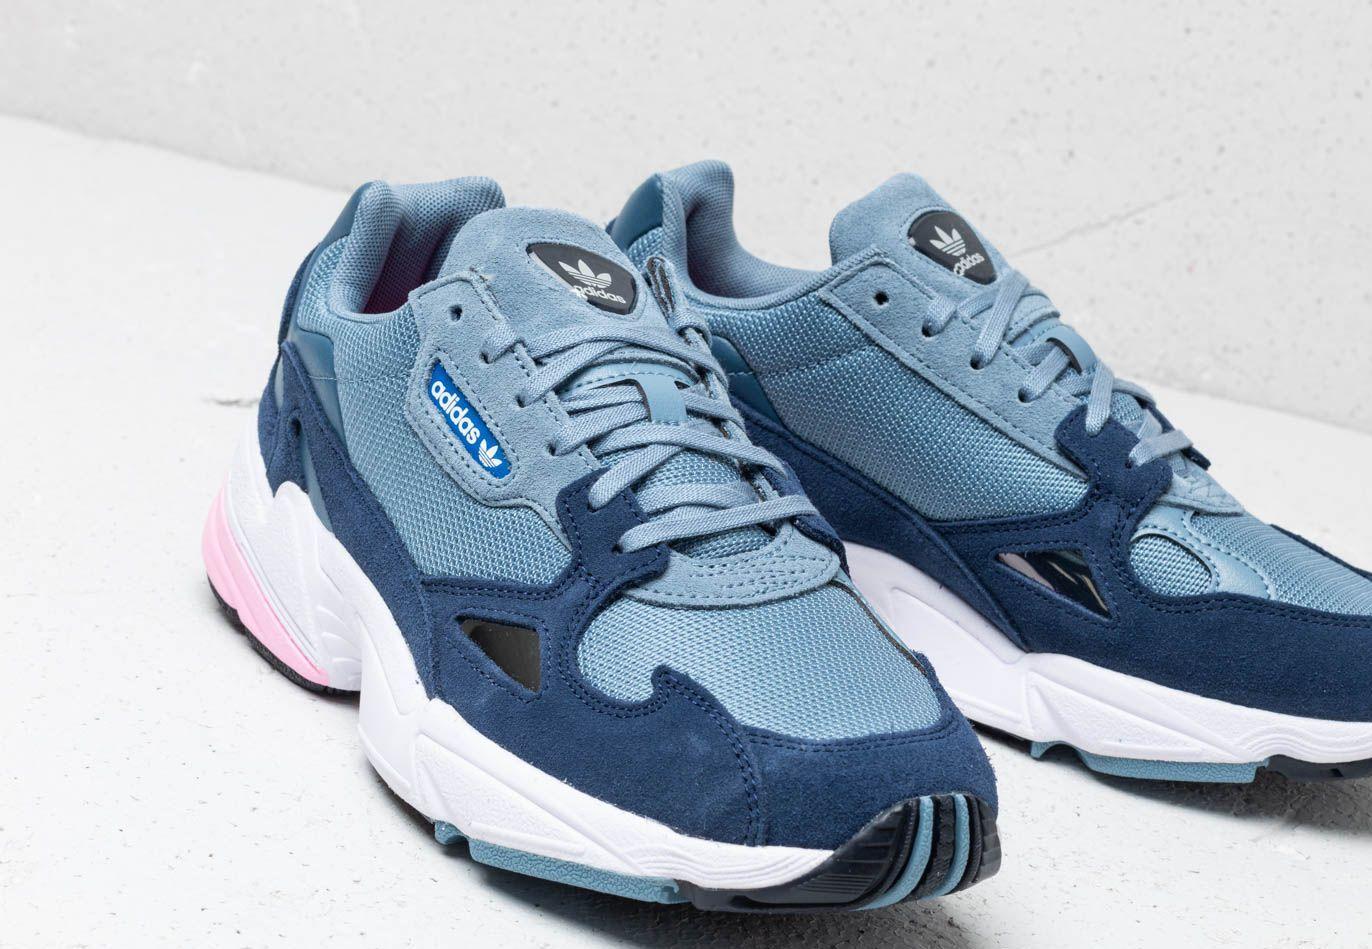 adidas falcon gray pink, enormous deal 72% off - statehouse.gov.sl